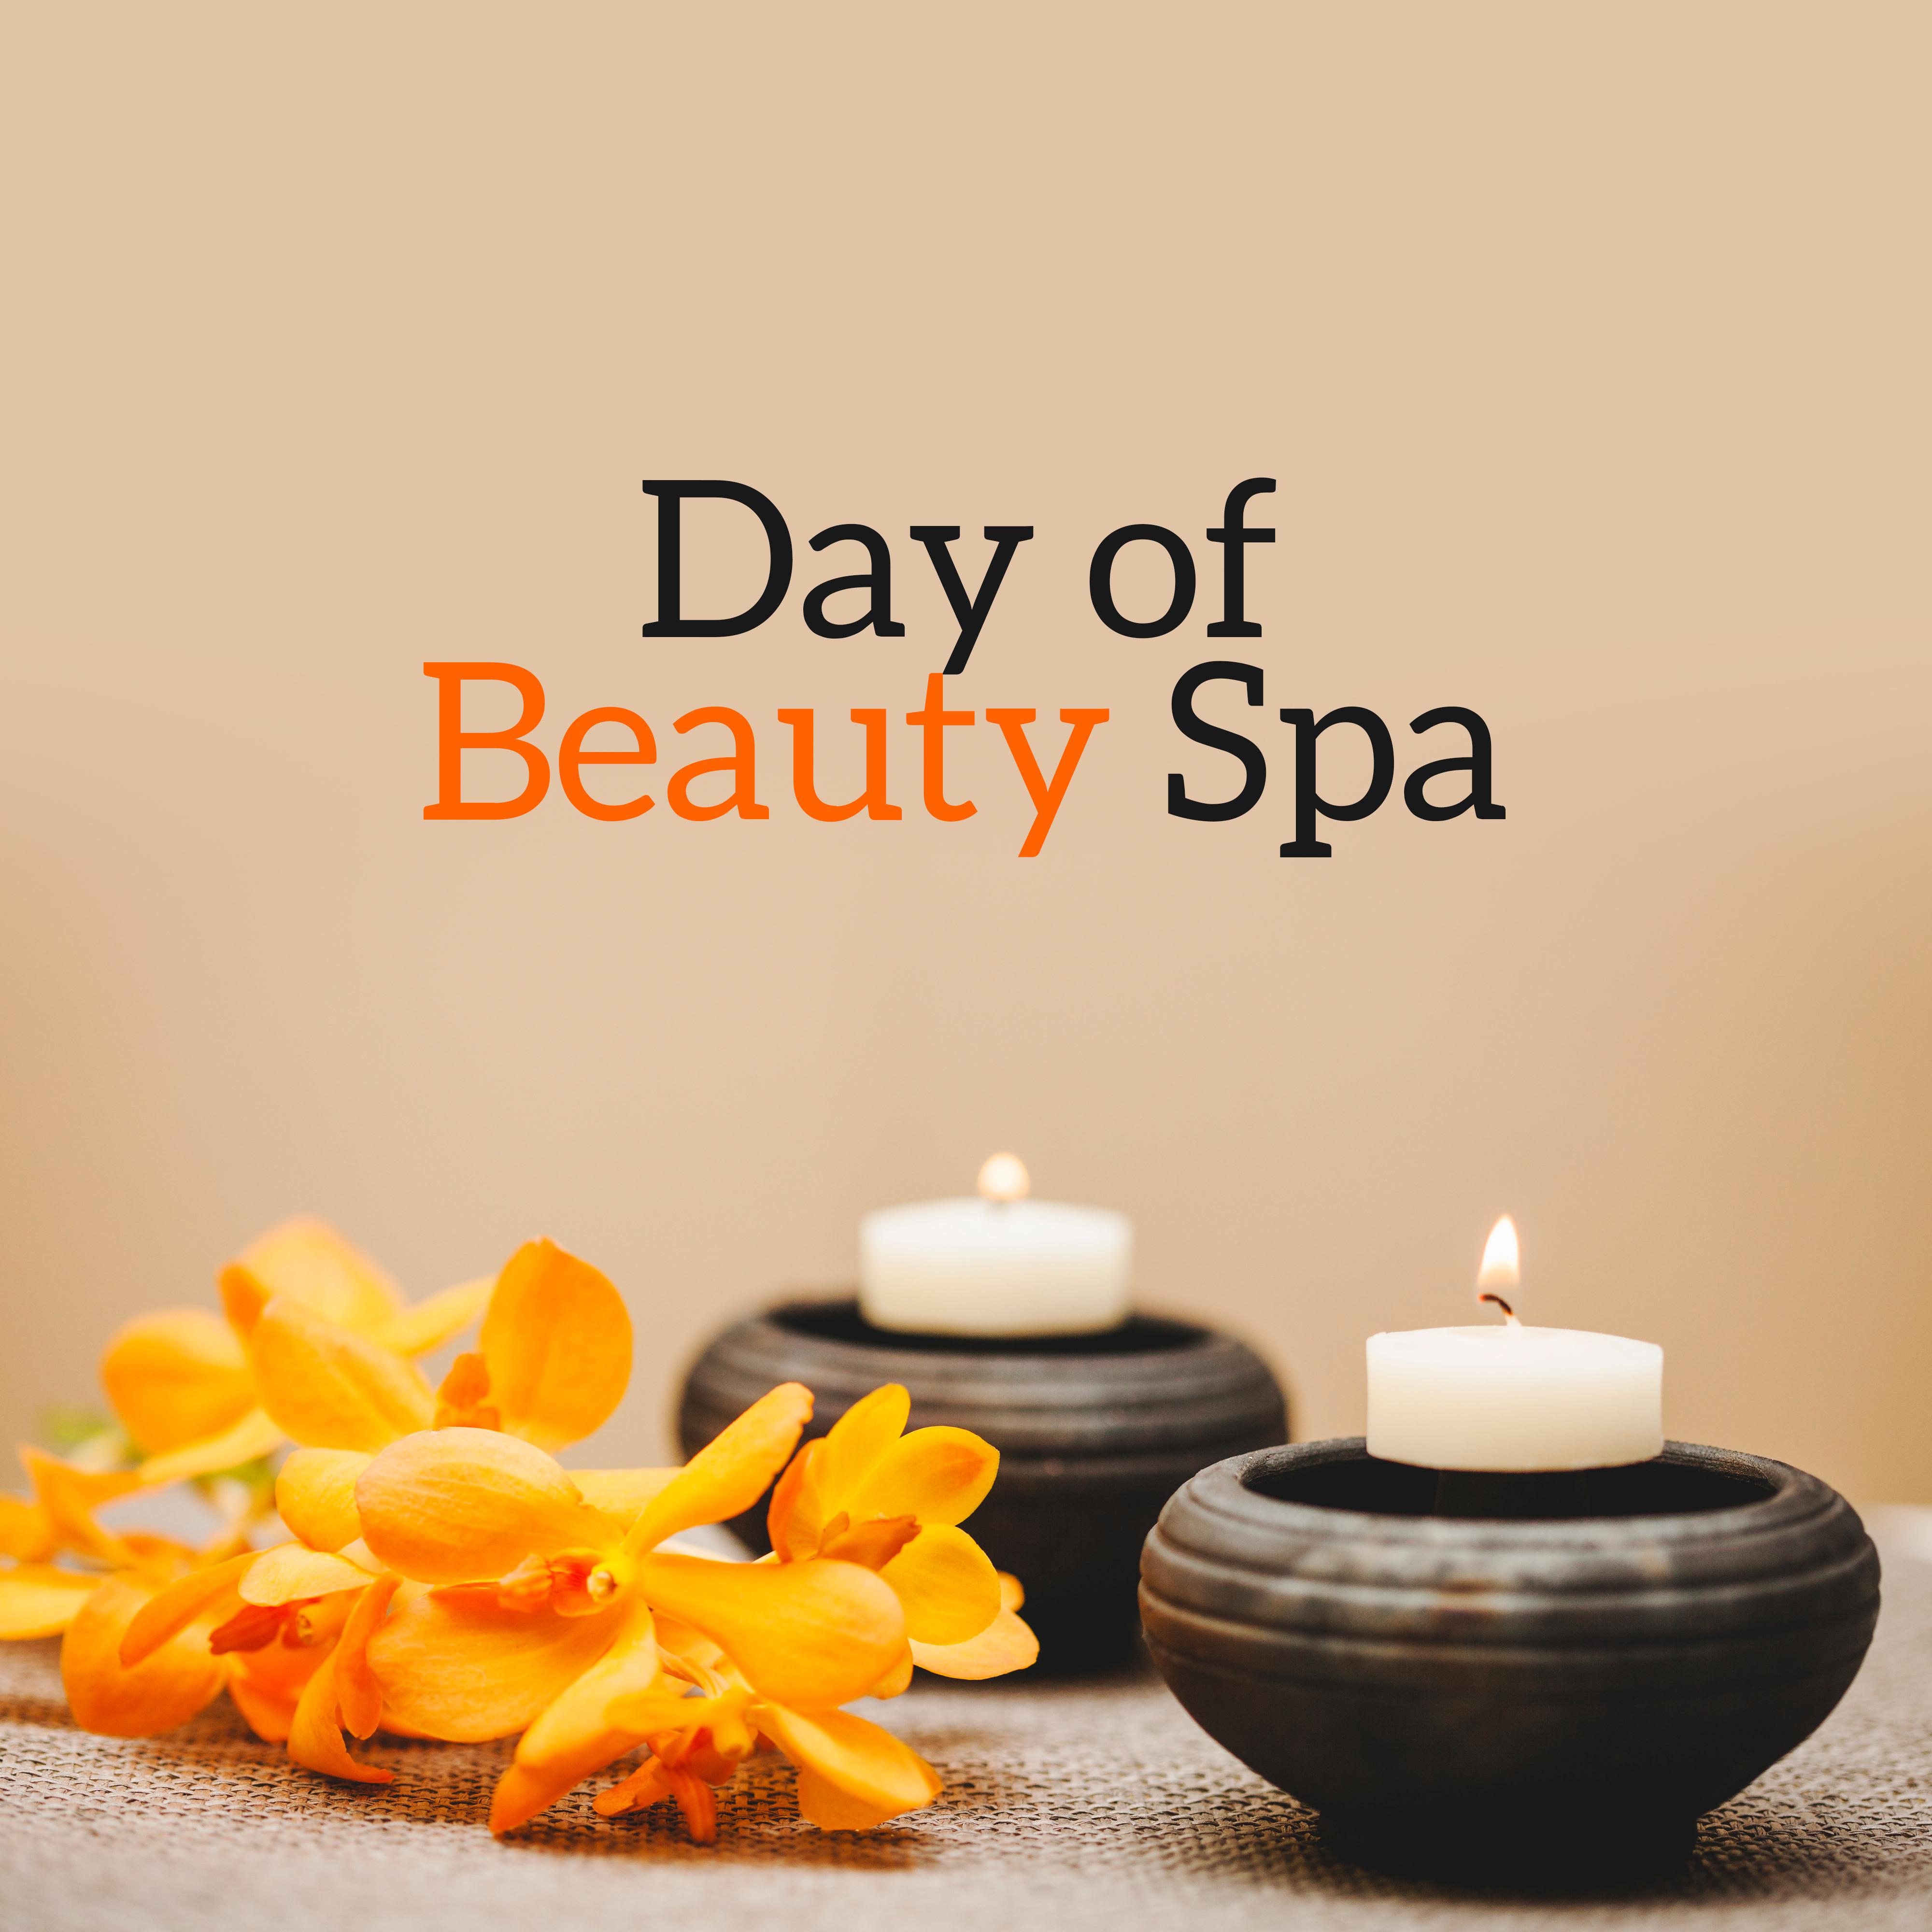 Day of Beauty Spa